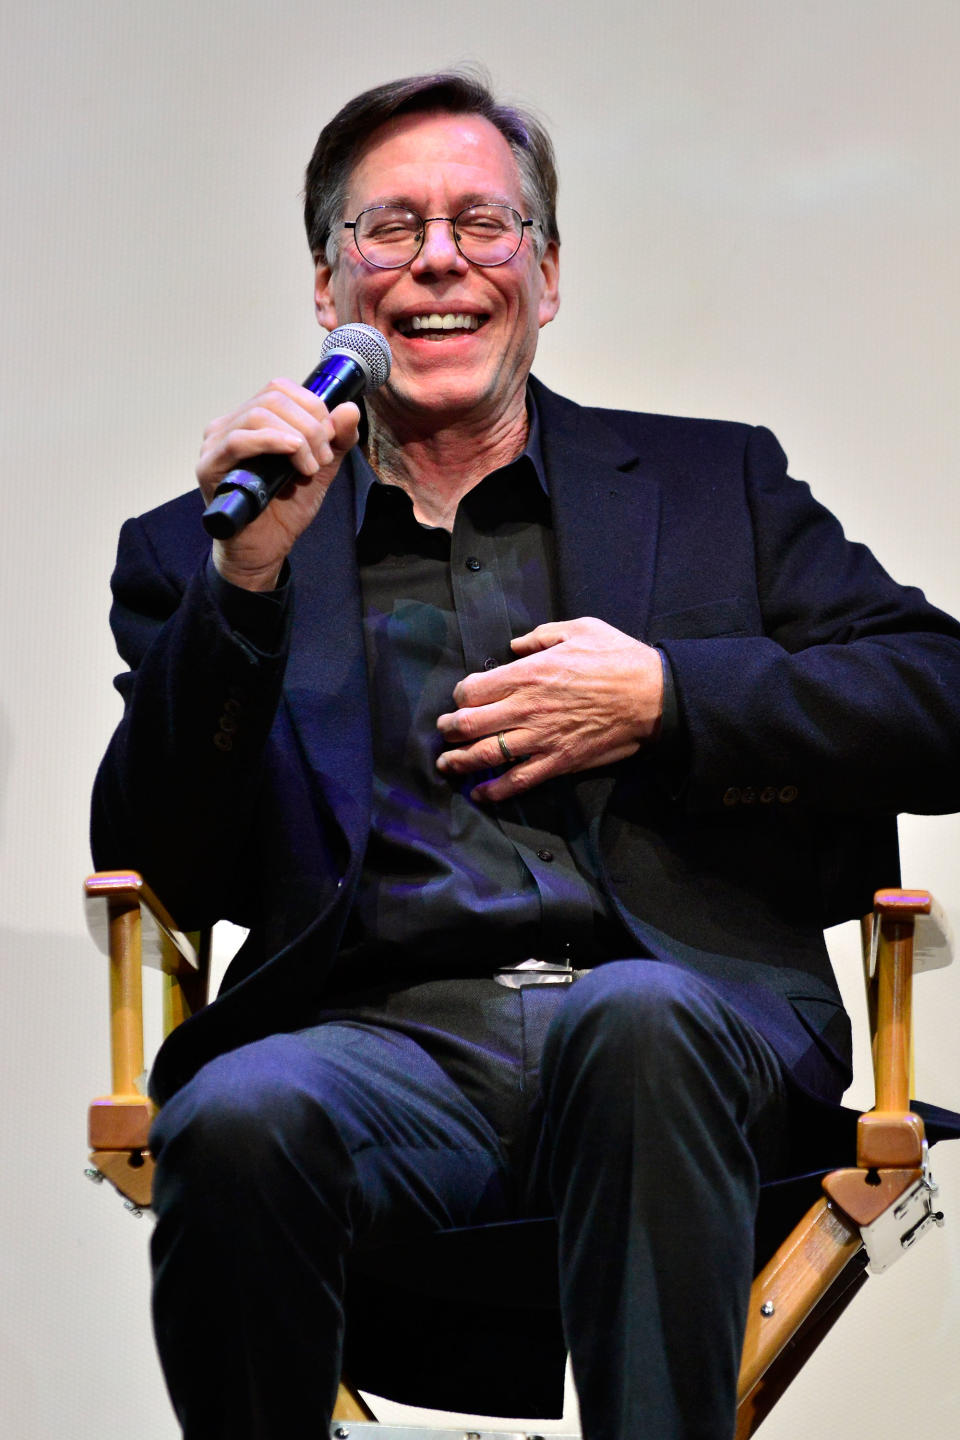 DECEMBER 03 - LOS ANGELES: Bob Lazar answers questions during a q&a session at Los Angeles Special Screening Of Documentary 'Bob Lazar: Area 51 & Flying Saucers' at Ace Hotel on December 3, 2018 in Los Angeles, California. (Photo by Jerod Harris/Getty Images)